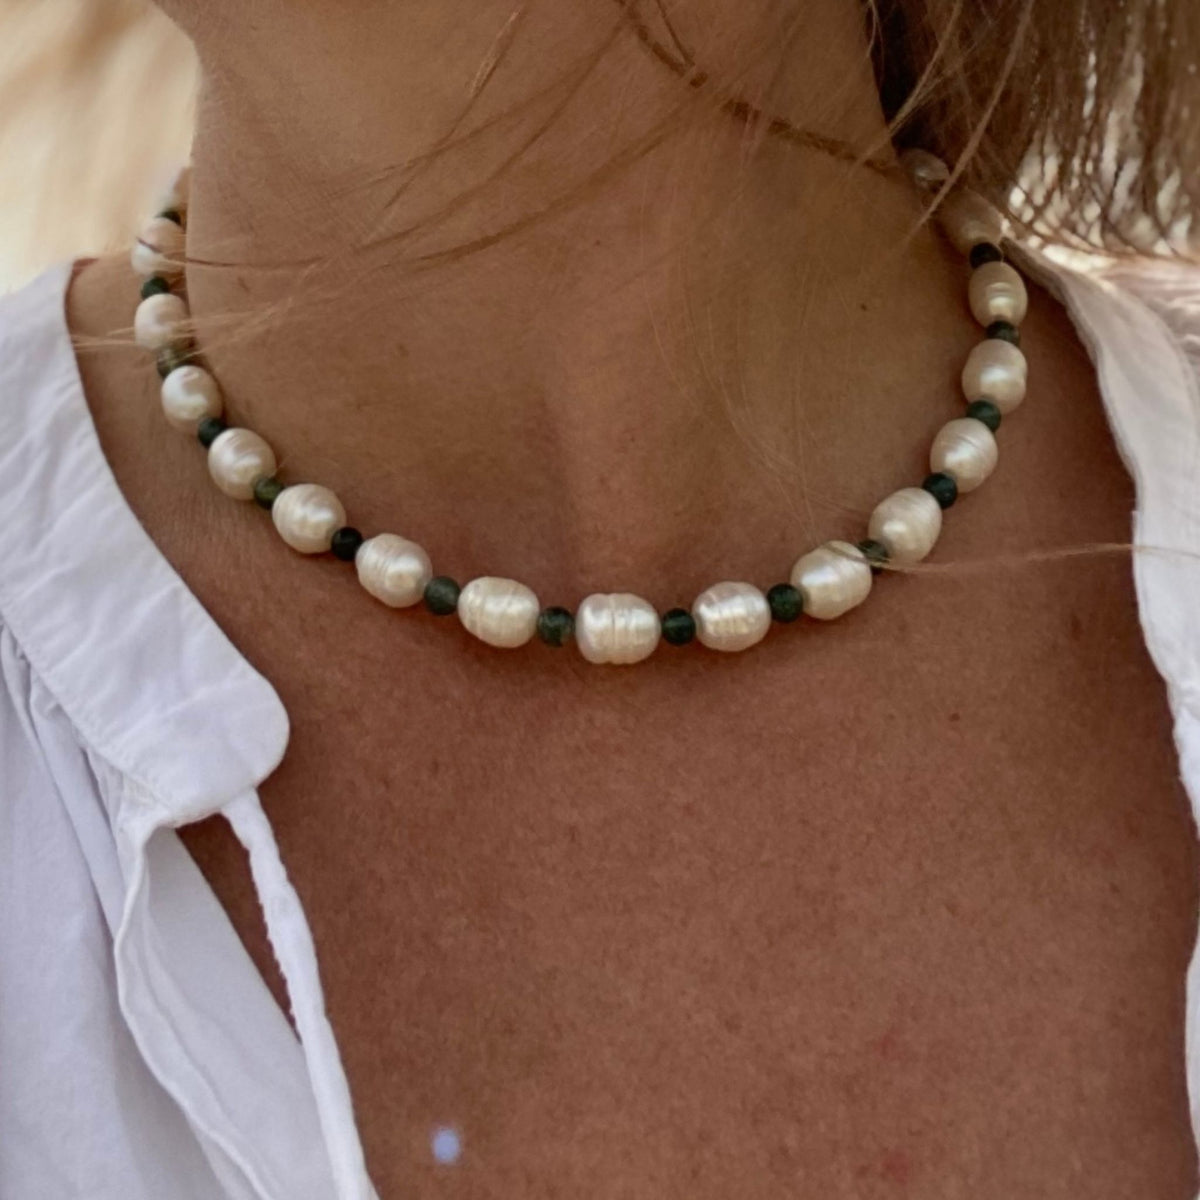 Confidence Necklace - White Freshwater Pearl Necklace